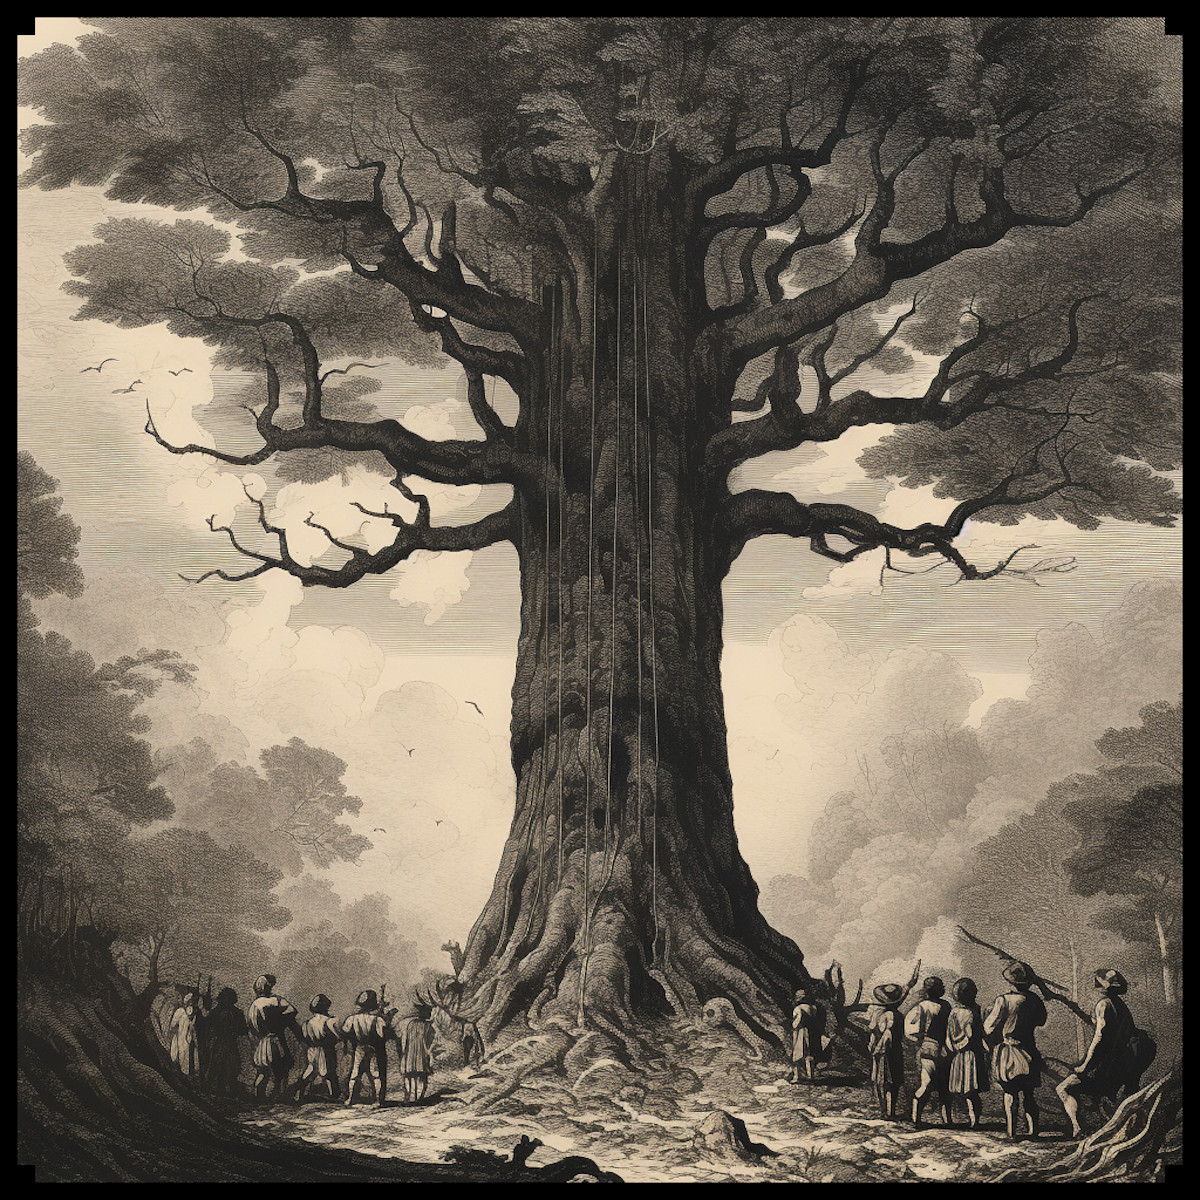 giant tree and ents with medieval fantasy people around, world trees, wonderdraft assets for photoshop gimp